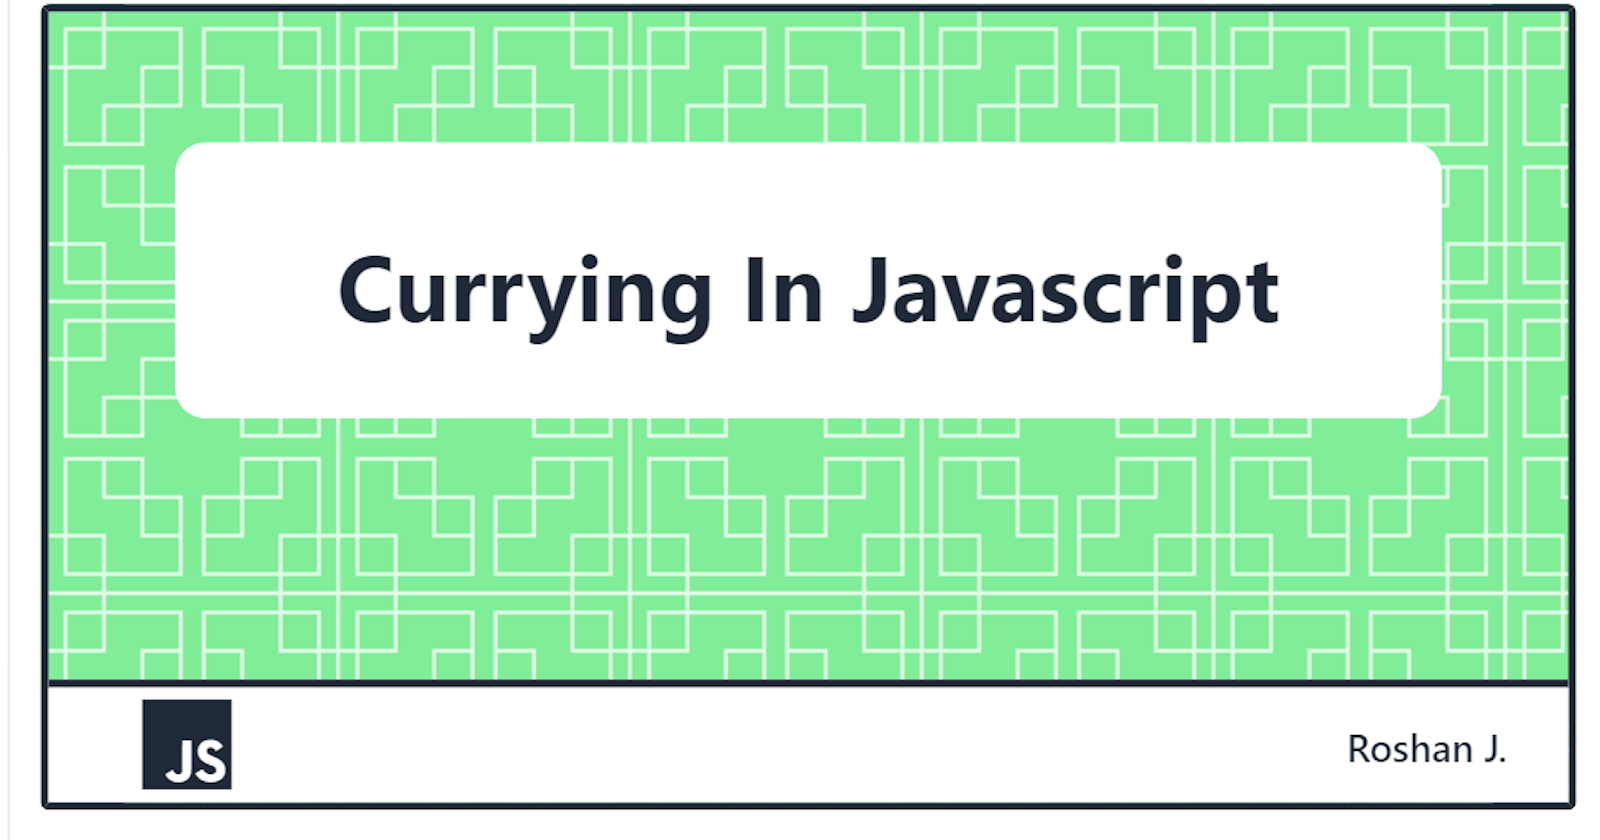 Currying in Javascript